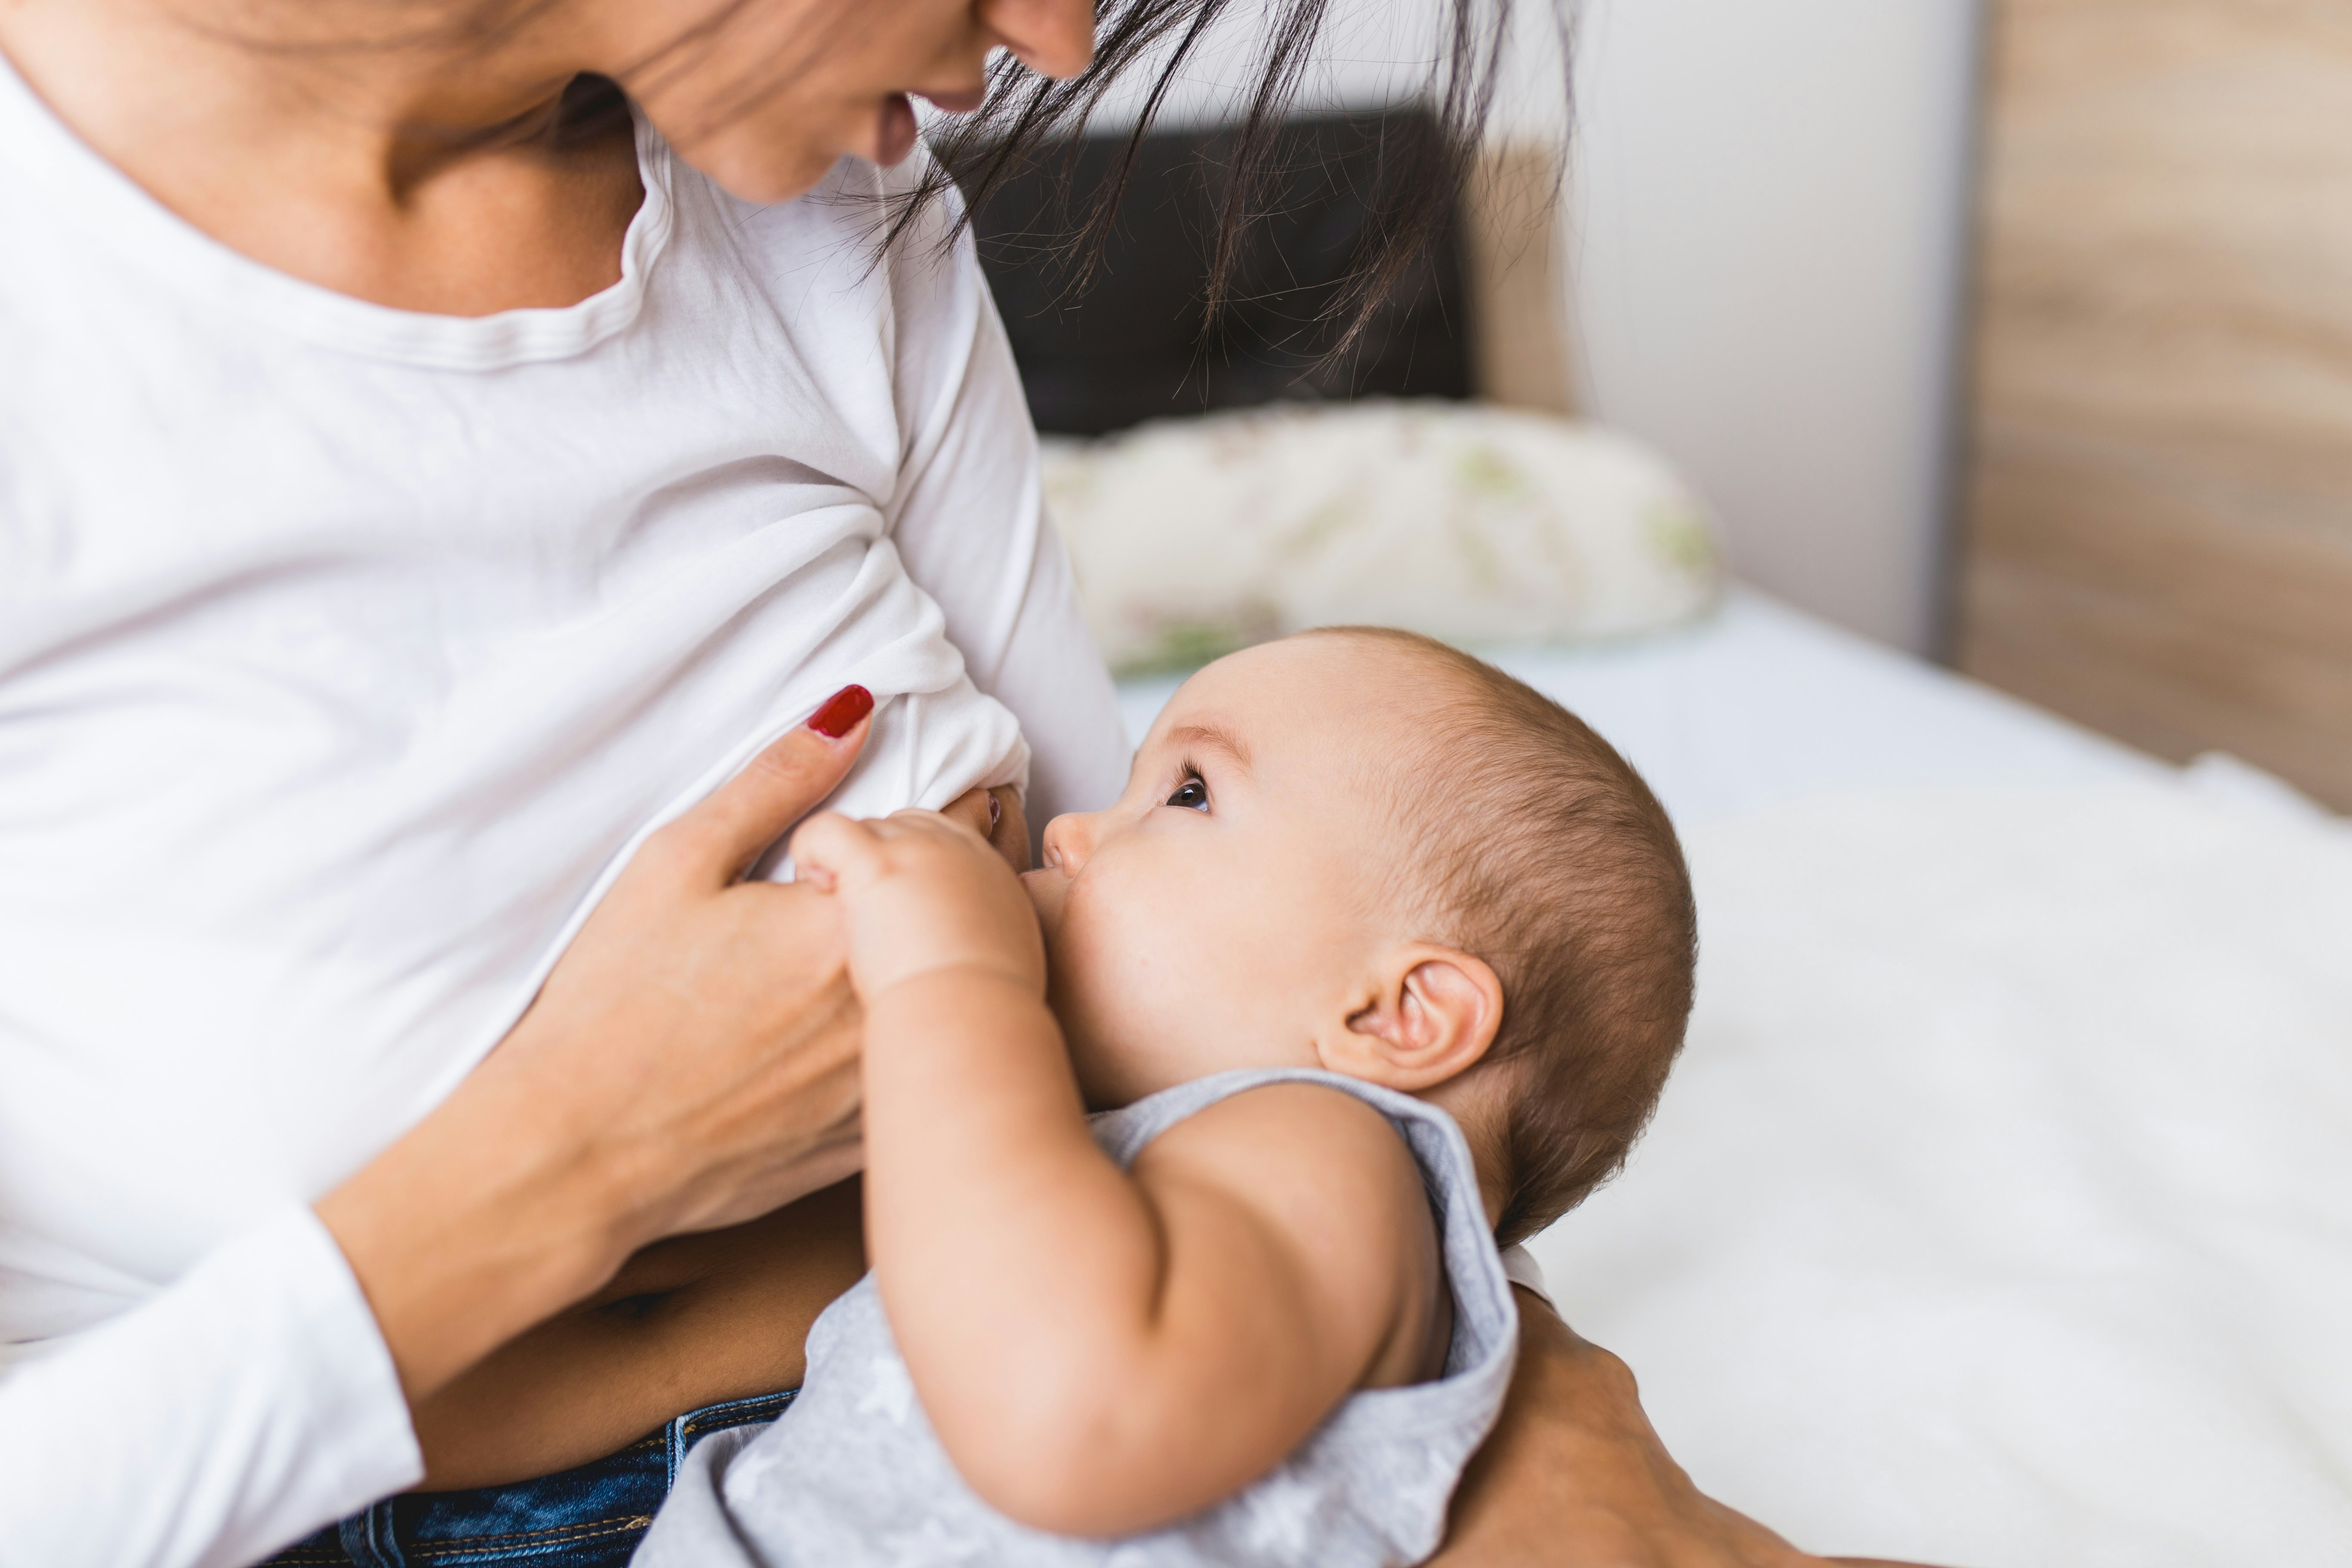 https://images.bauerhosting.com/affiliates/sites/12/motherandbaby/2021/09/breastfeeding-both-boobs1.png?ar=16%3A9&fit=crop&crop=top&auto=format&w=undefined&q=80